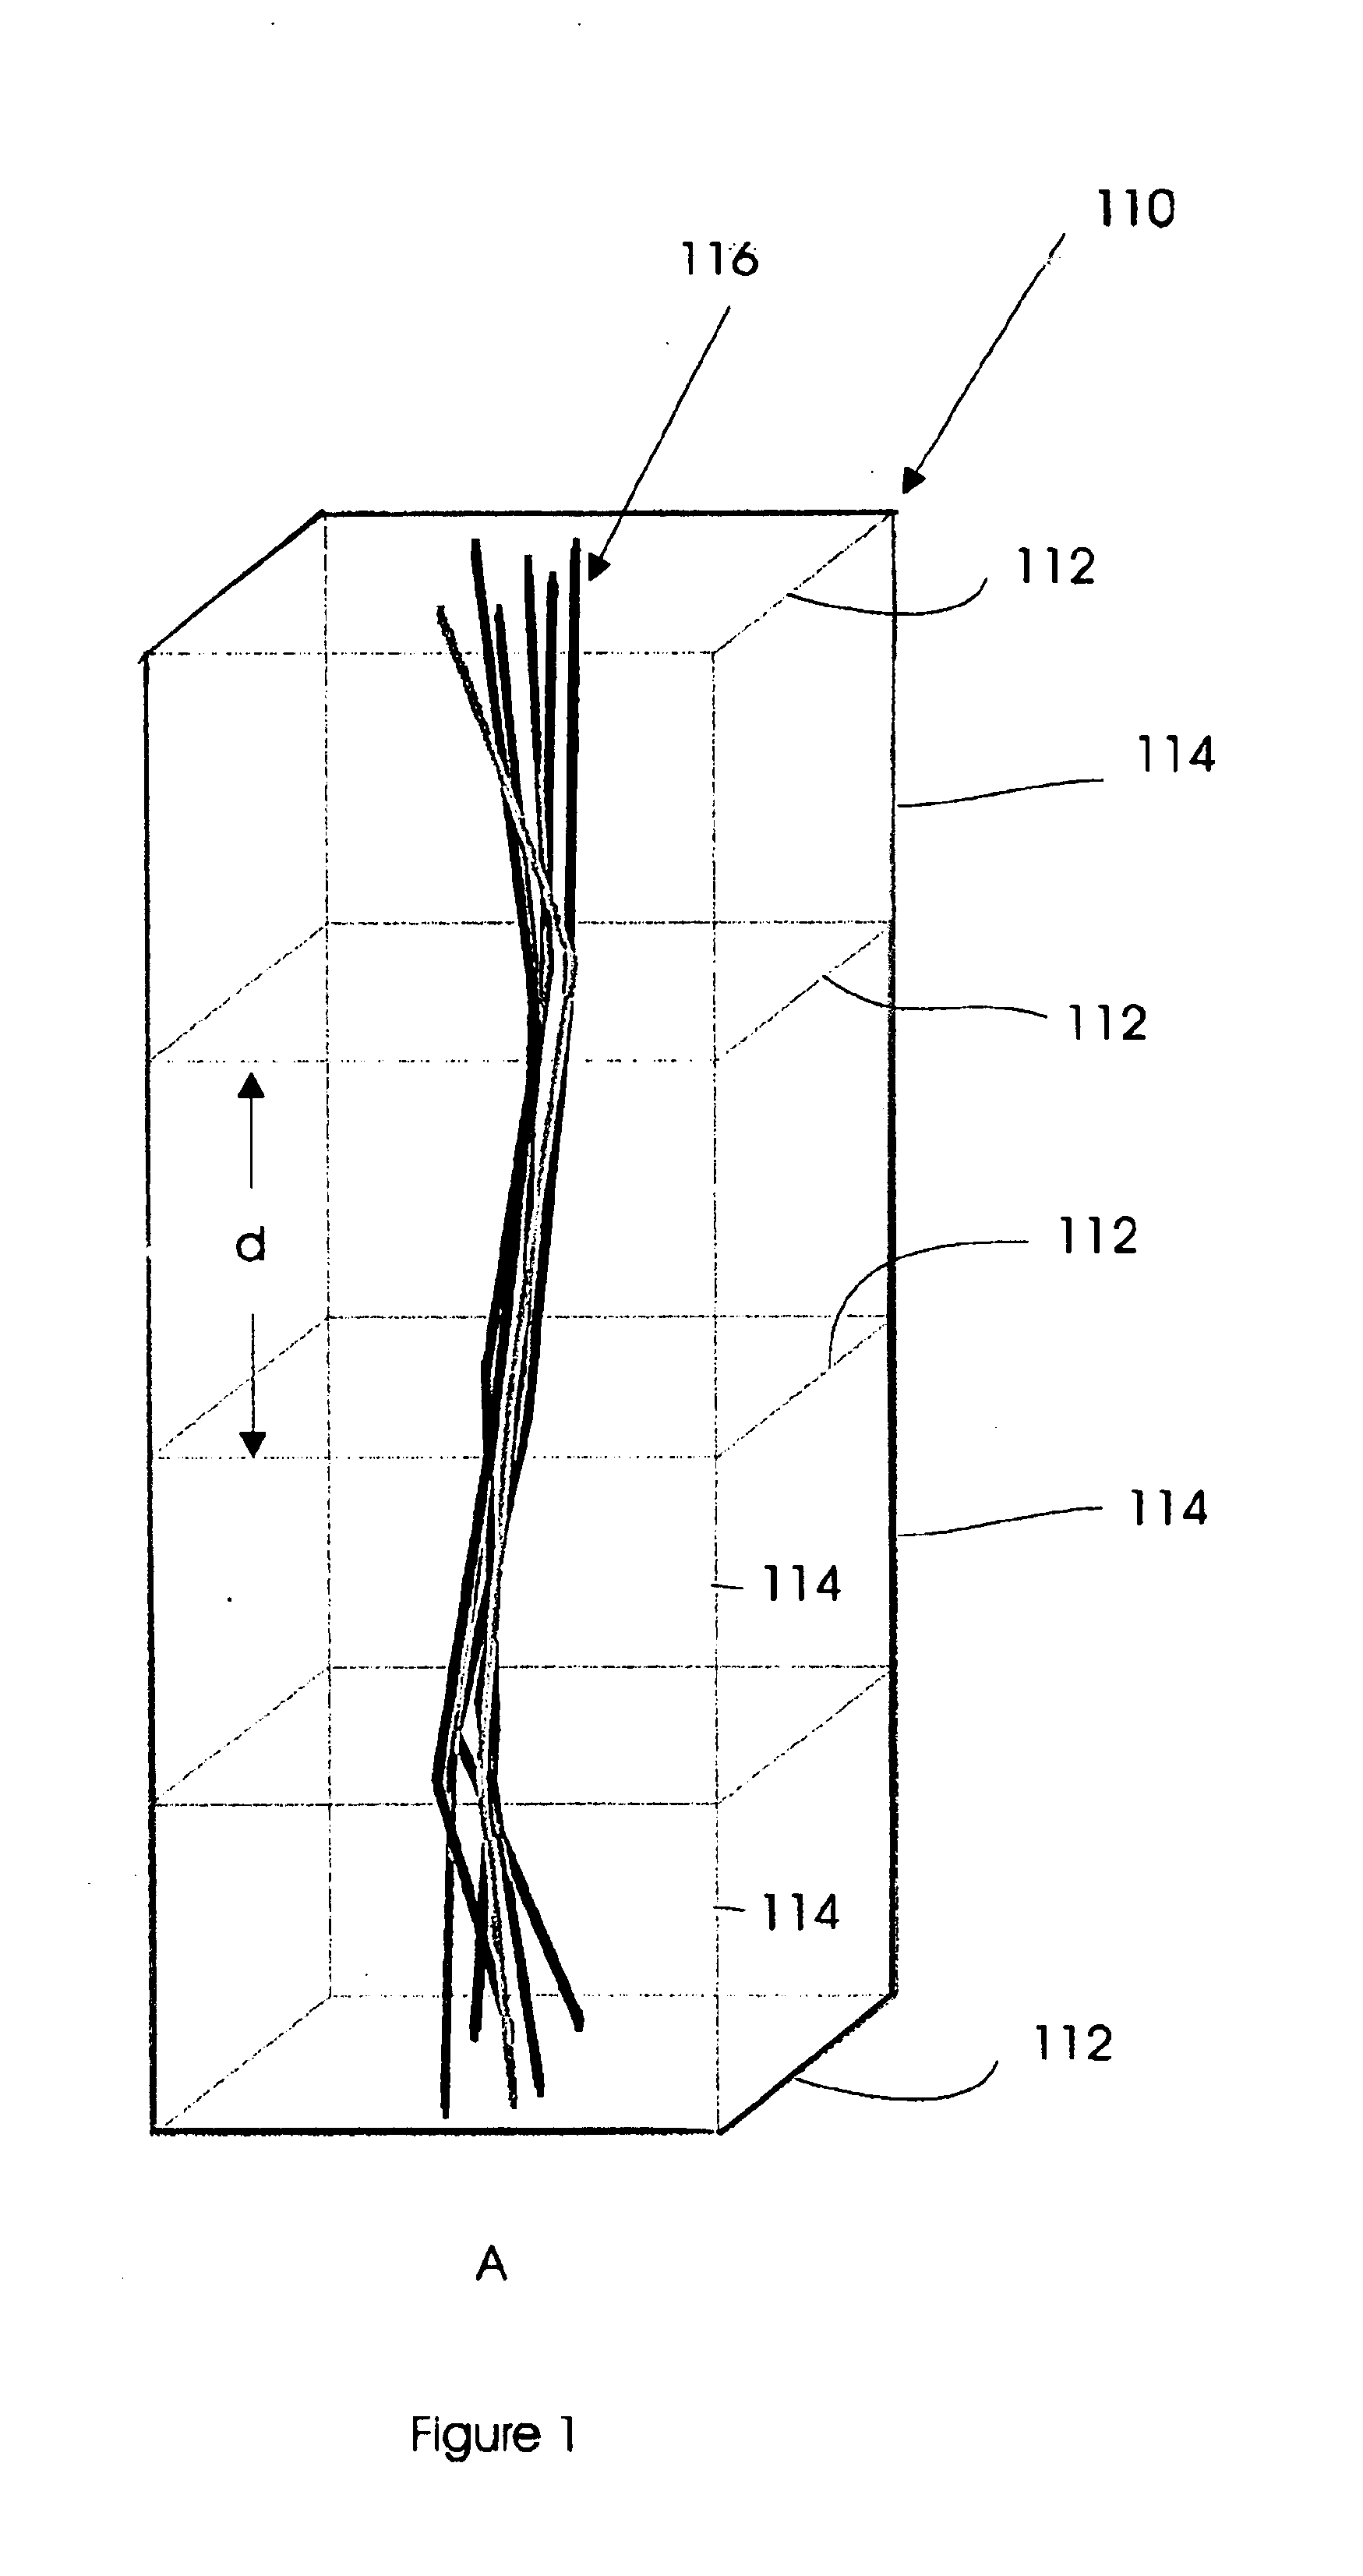 Programs and methods for the display, analysis and manipulation of multi-dimensional data implemented on a computer